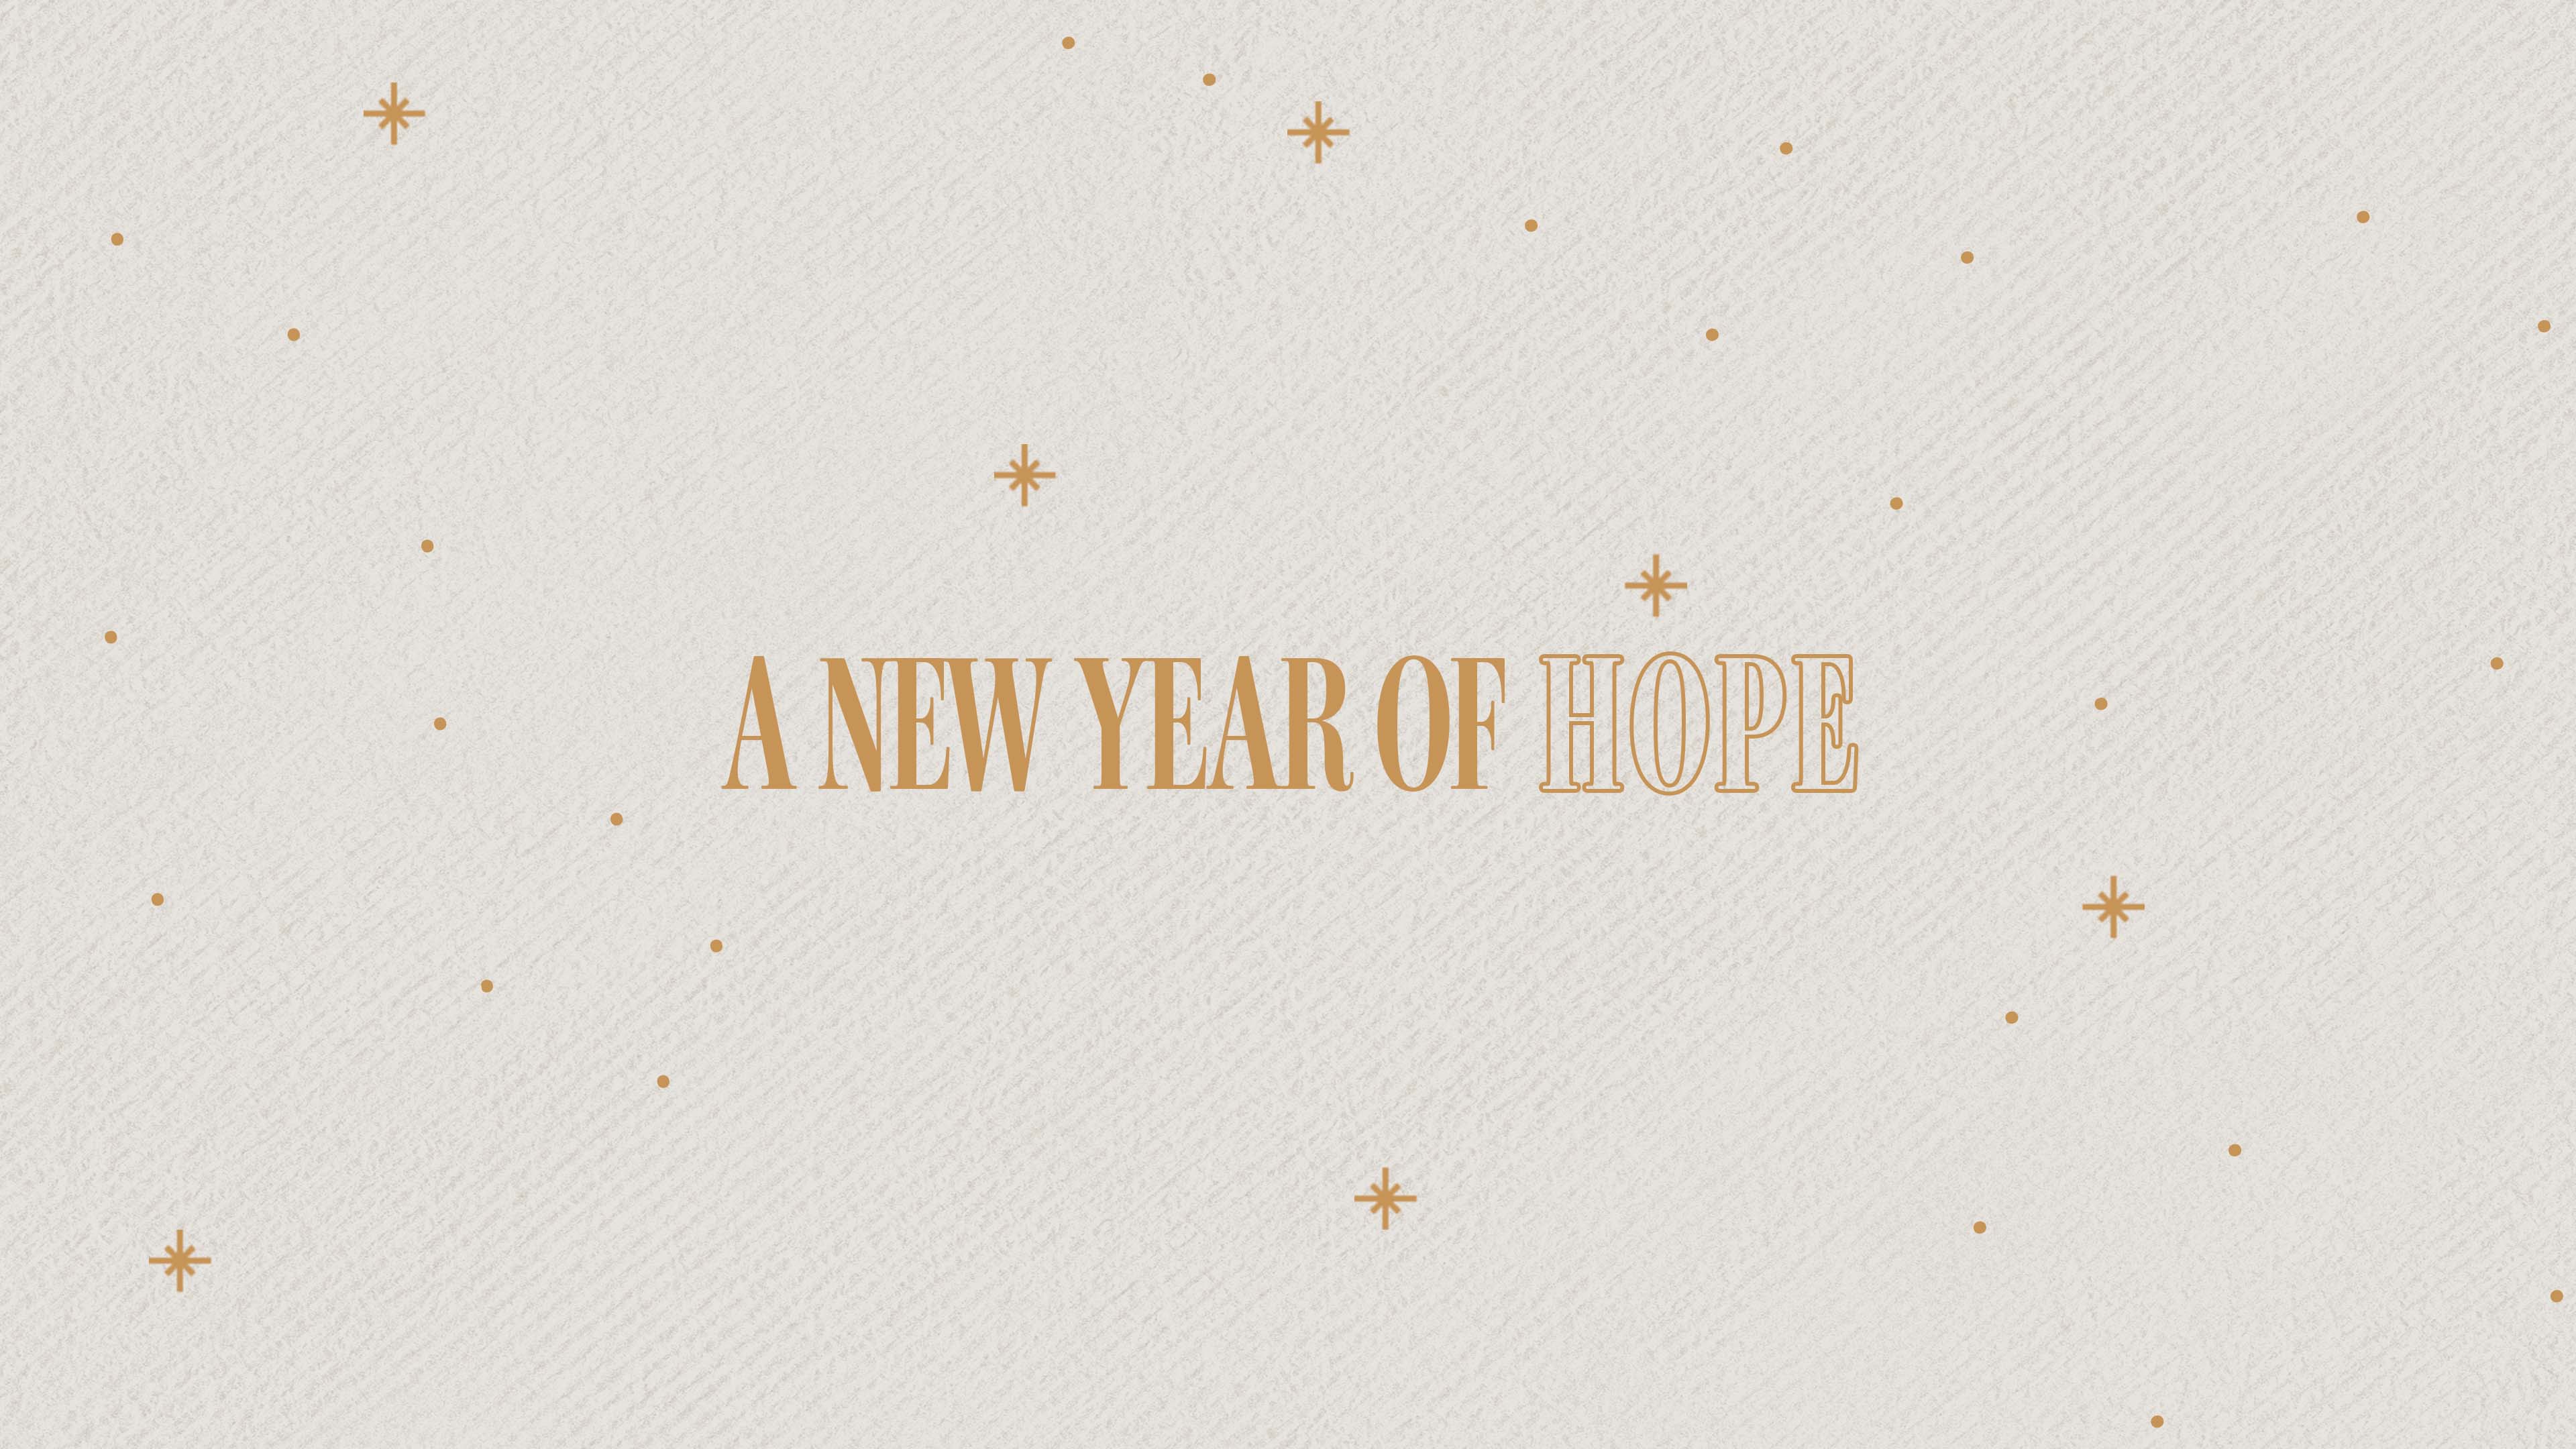 A NEW YEAR OF HOPE